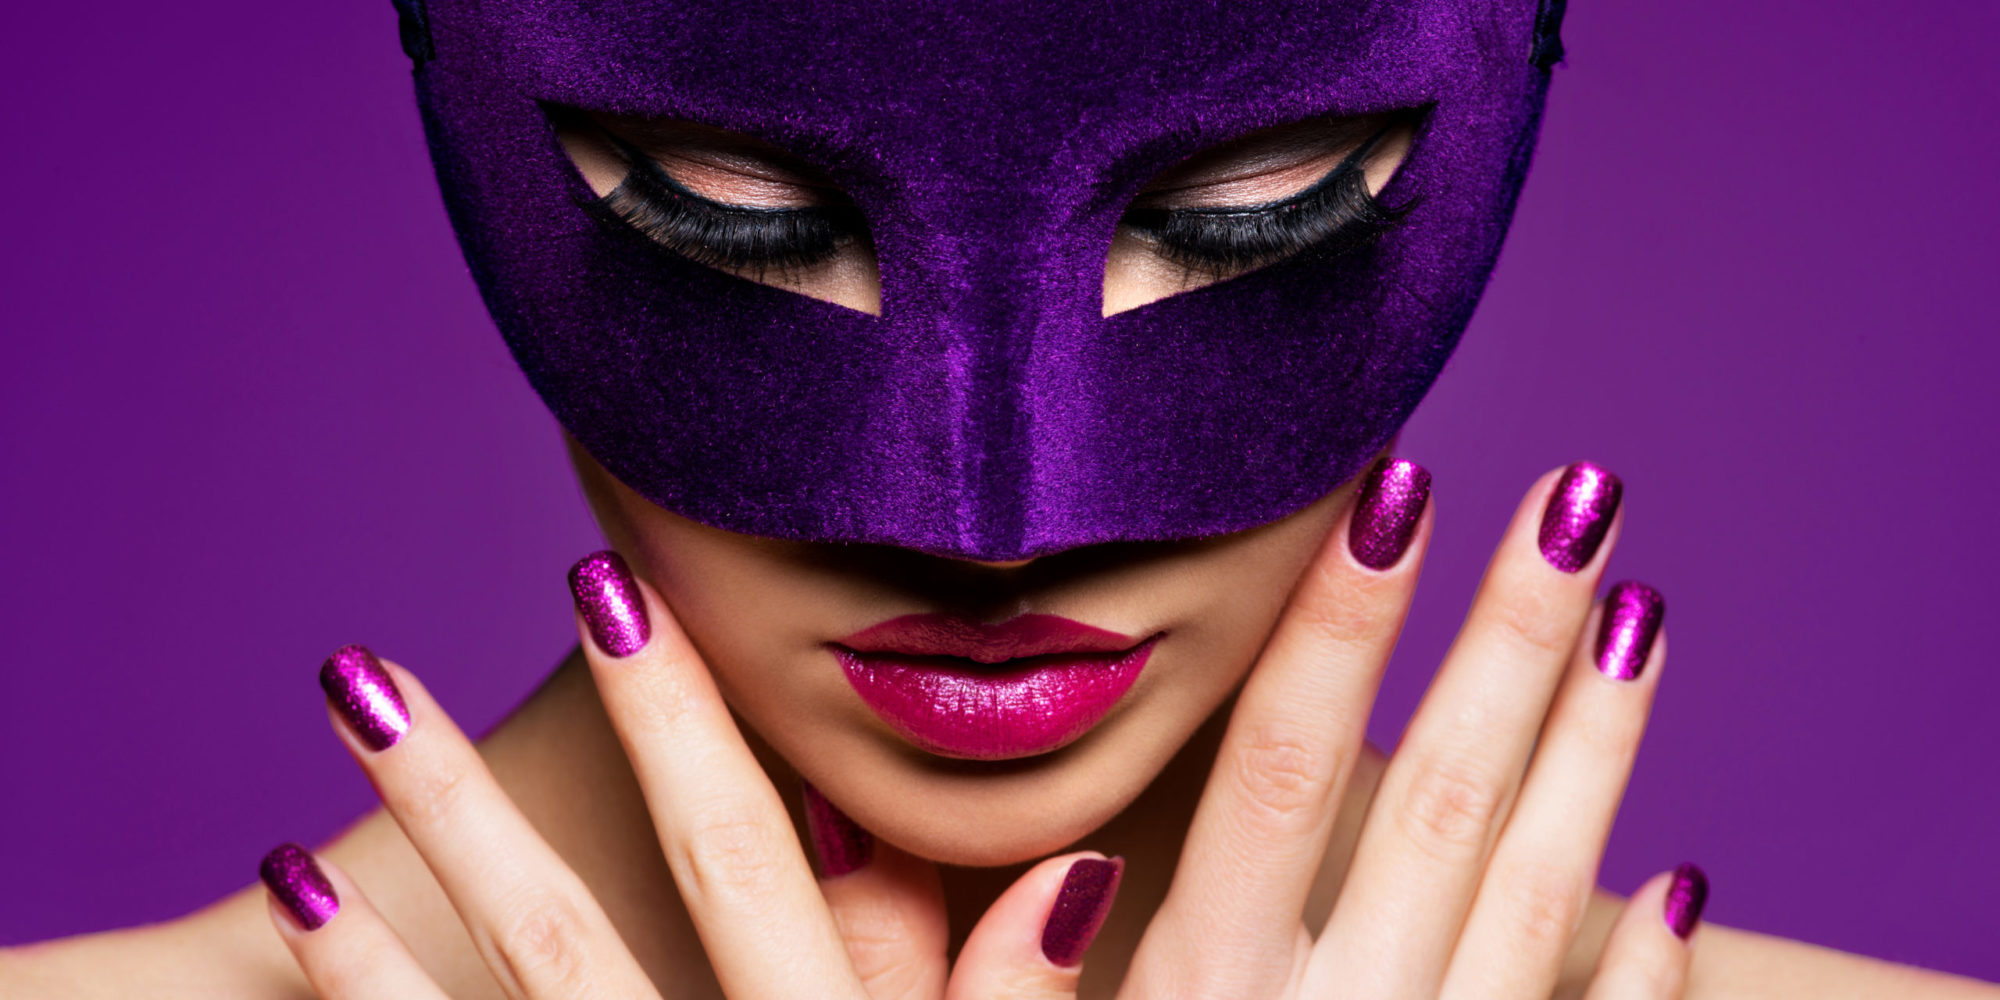 Portrait of a beautiful  woman with purple nails and violet theatre mask on face.